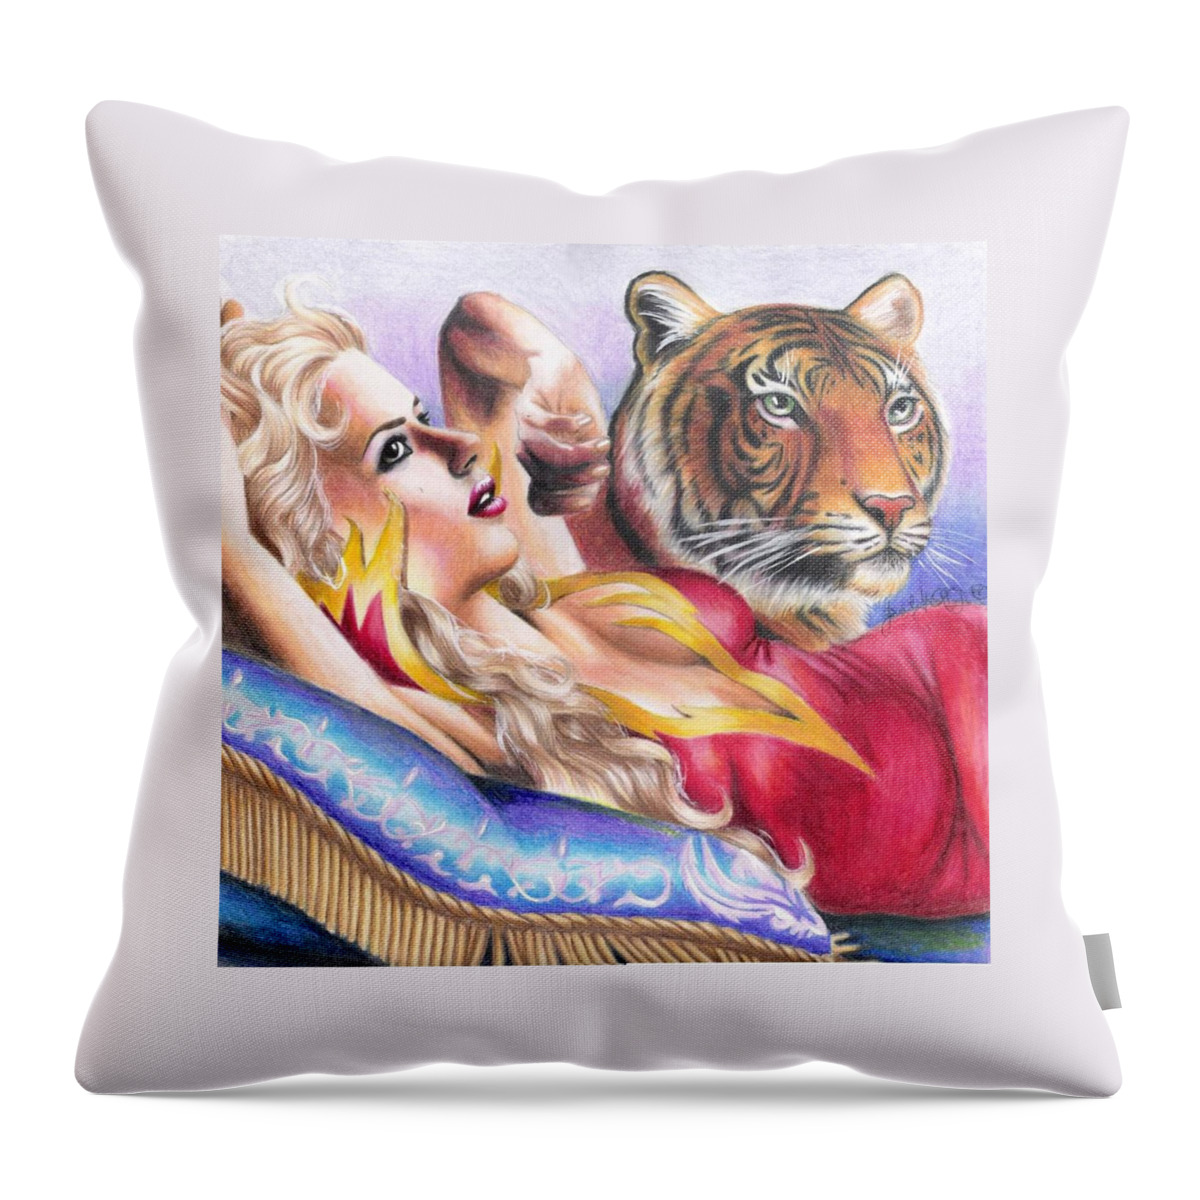 Tiger Throw Pillow featuring the drawing Tigeress by Scarlett Royale